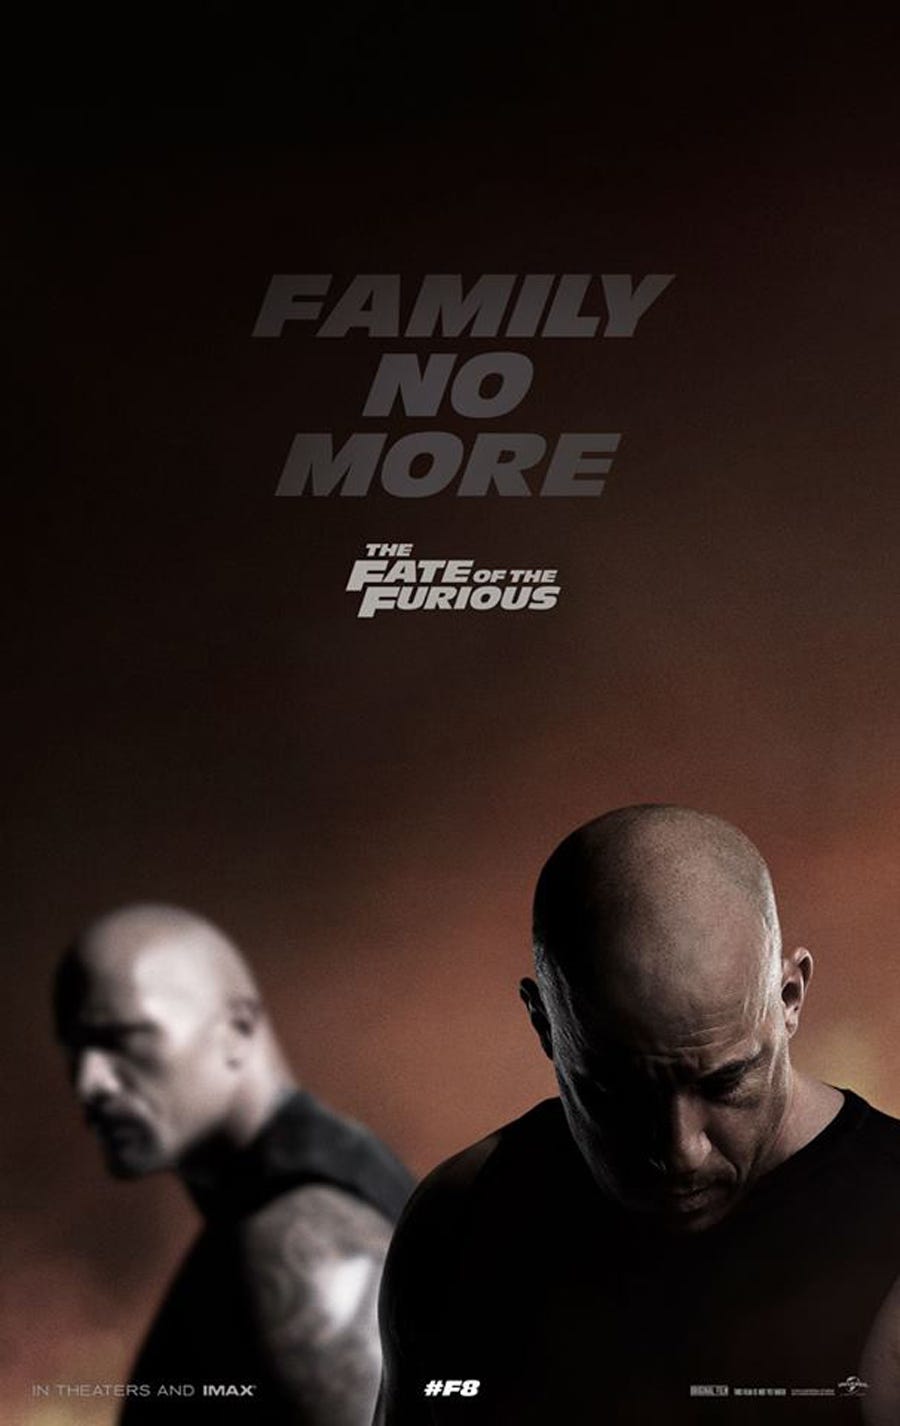 The Fate of the Furious Poster Teases 'Family No More'